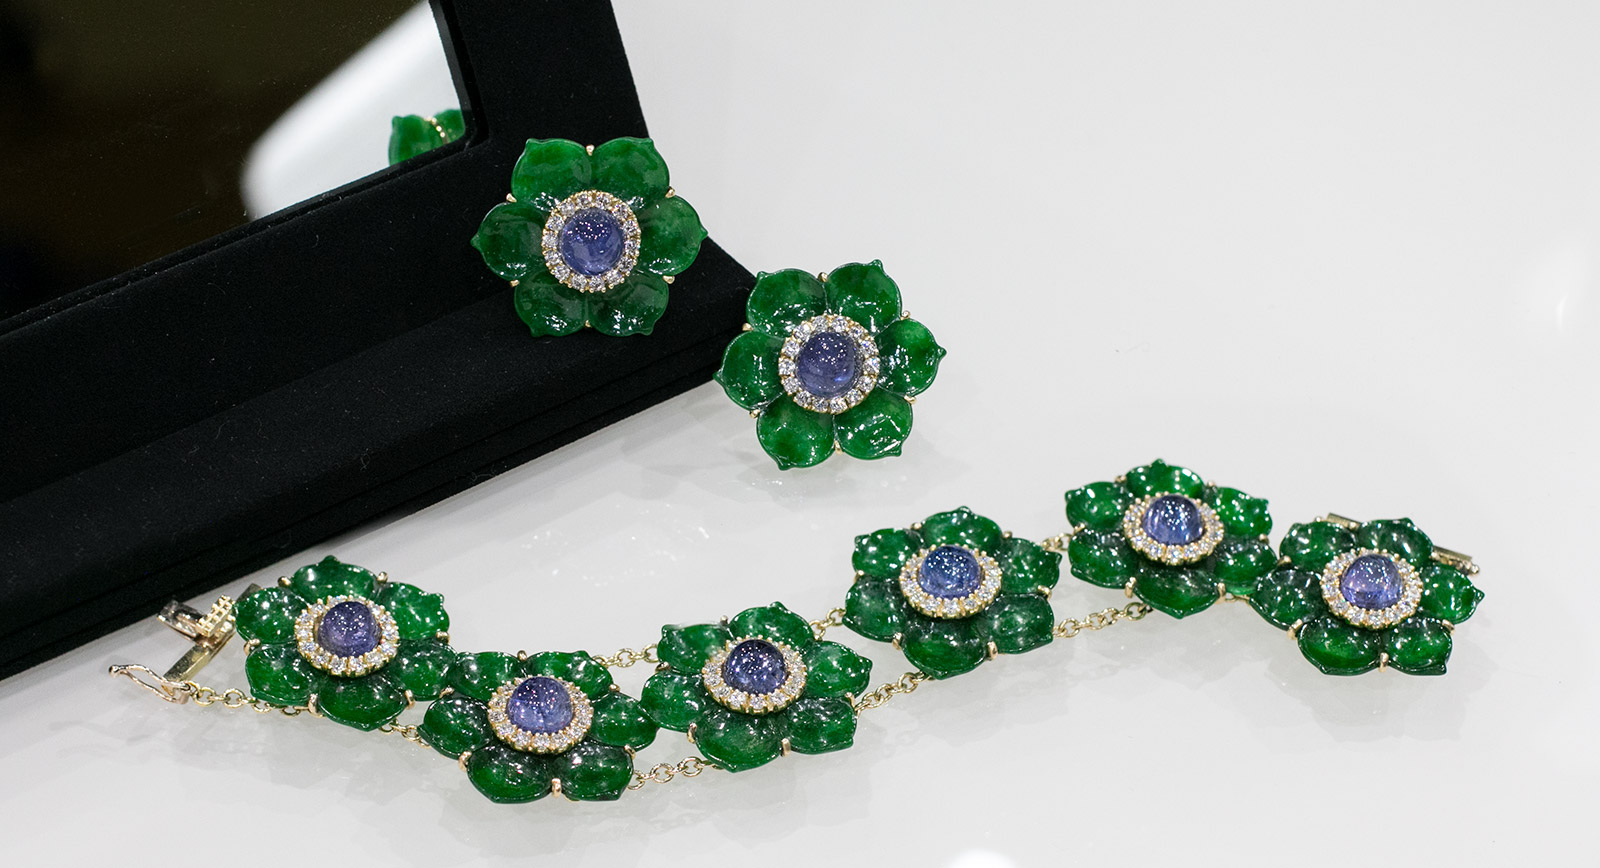 Veschetti bracelet and earrings with carved jade and sapphire cabochons, accented with diamonds in yellow gold